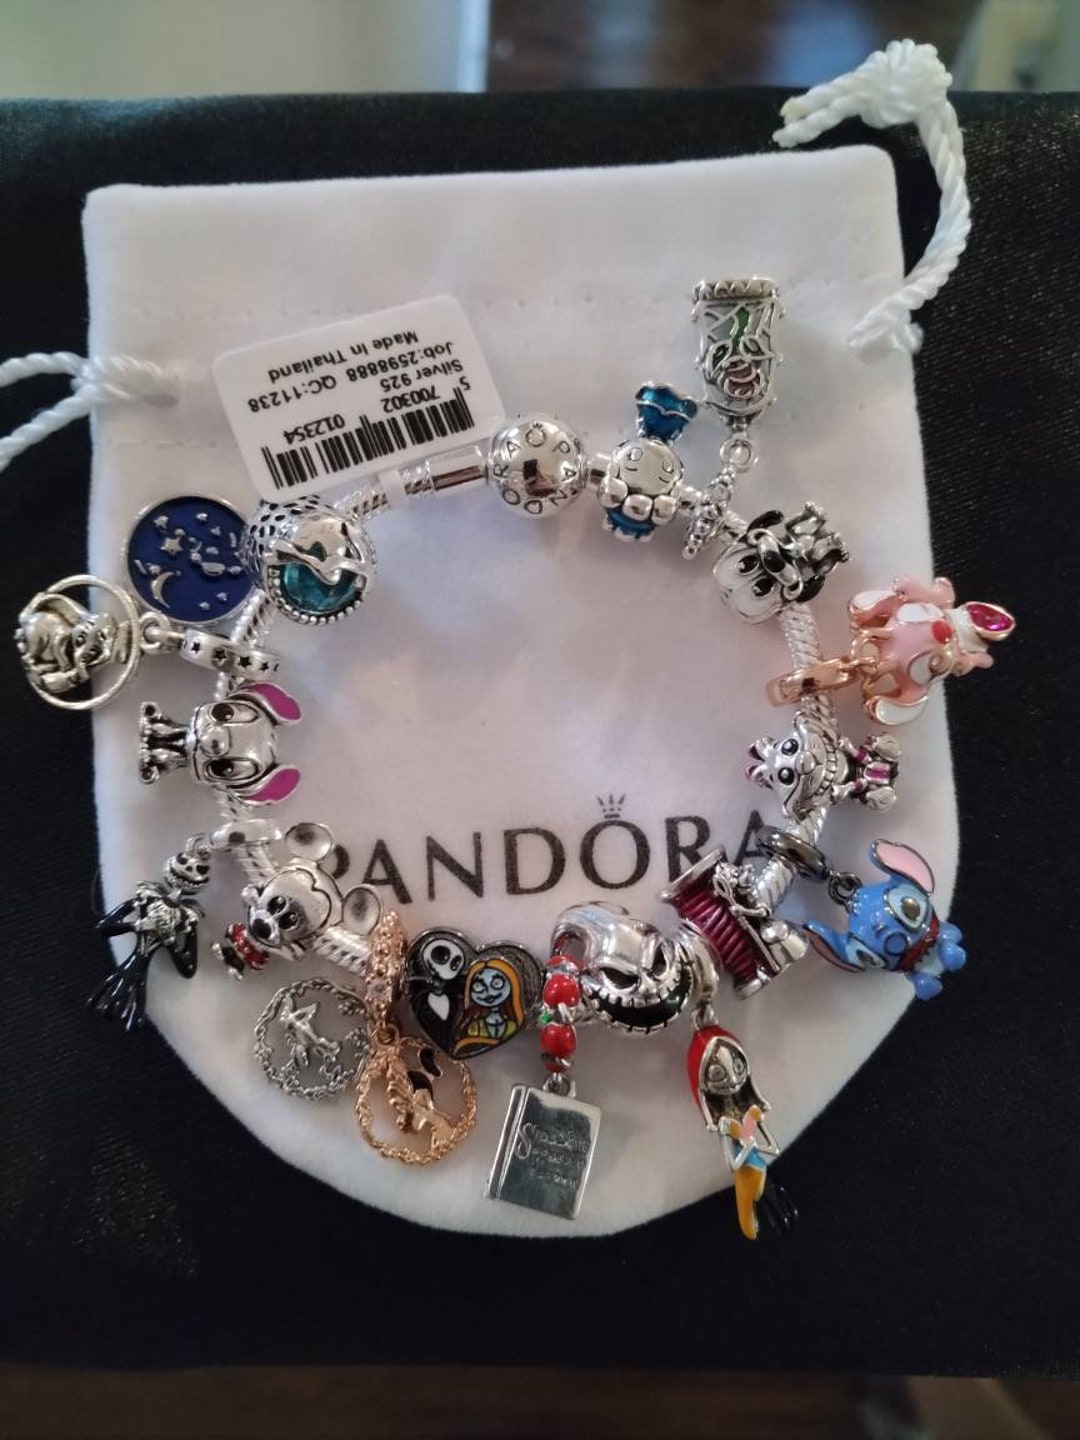 Pandora Bracelet With Character Themed Charms - Etsy